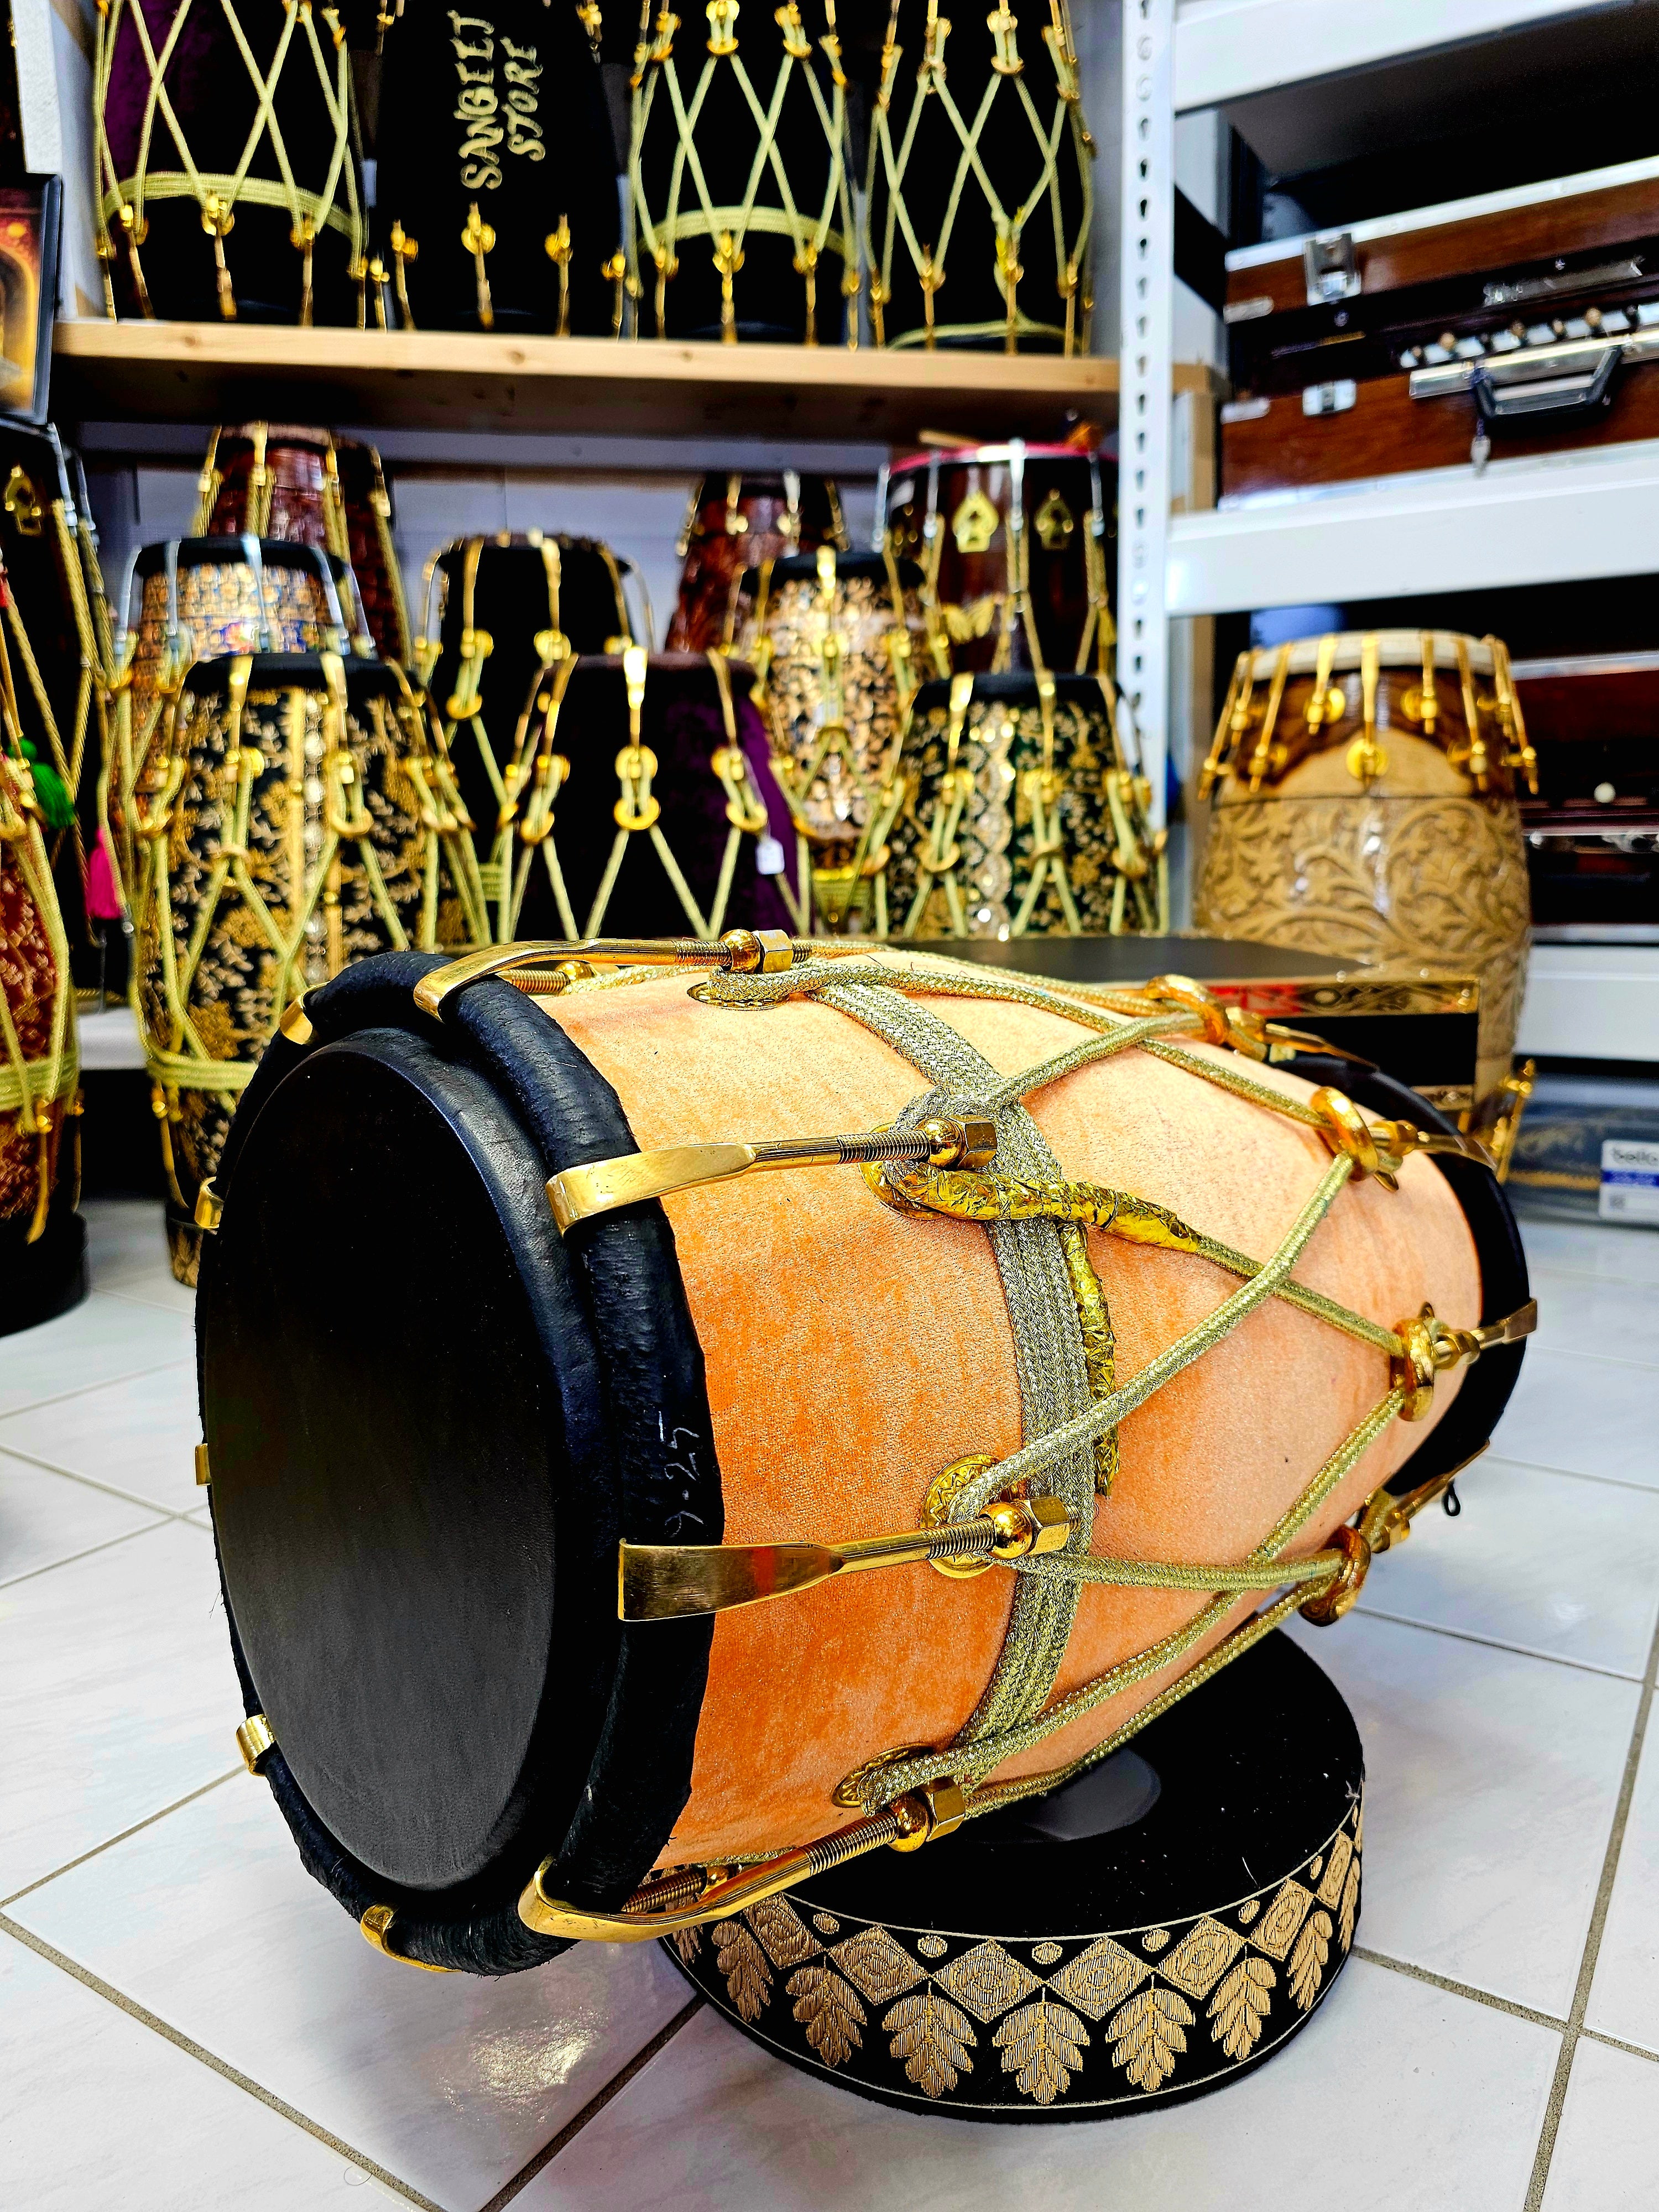 Peach Melody: Red Sheesham Dholak in Peach Velvet Wrap, Black Skins, Golden Brass Accents, and Intricate Rope Design